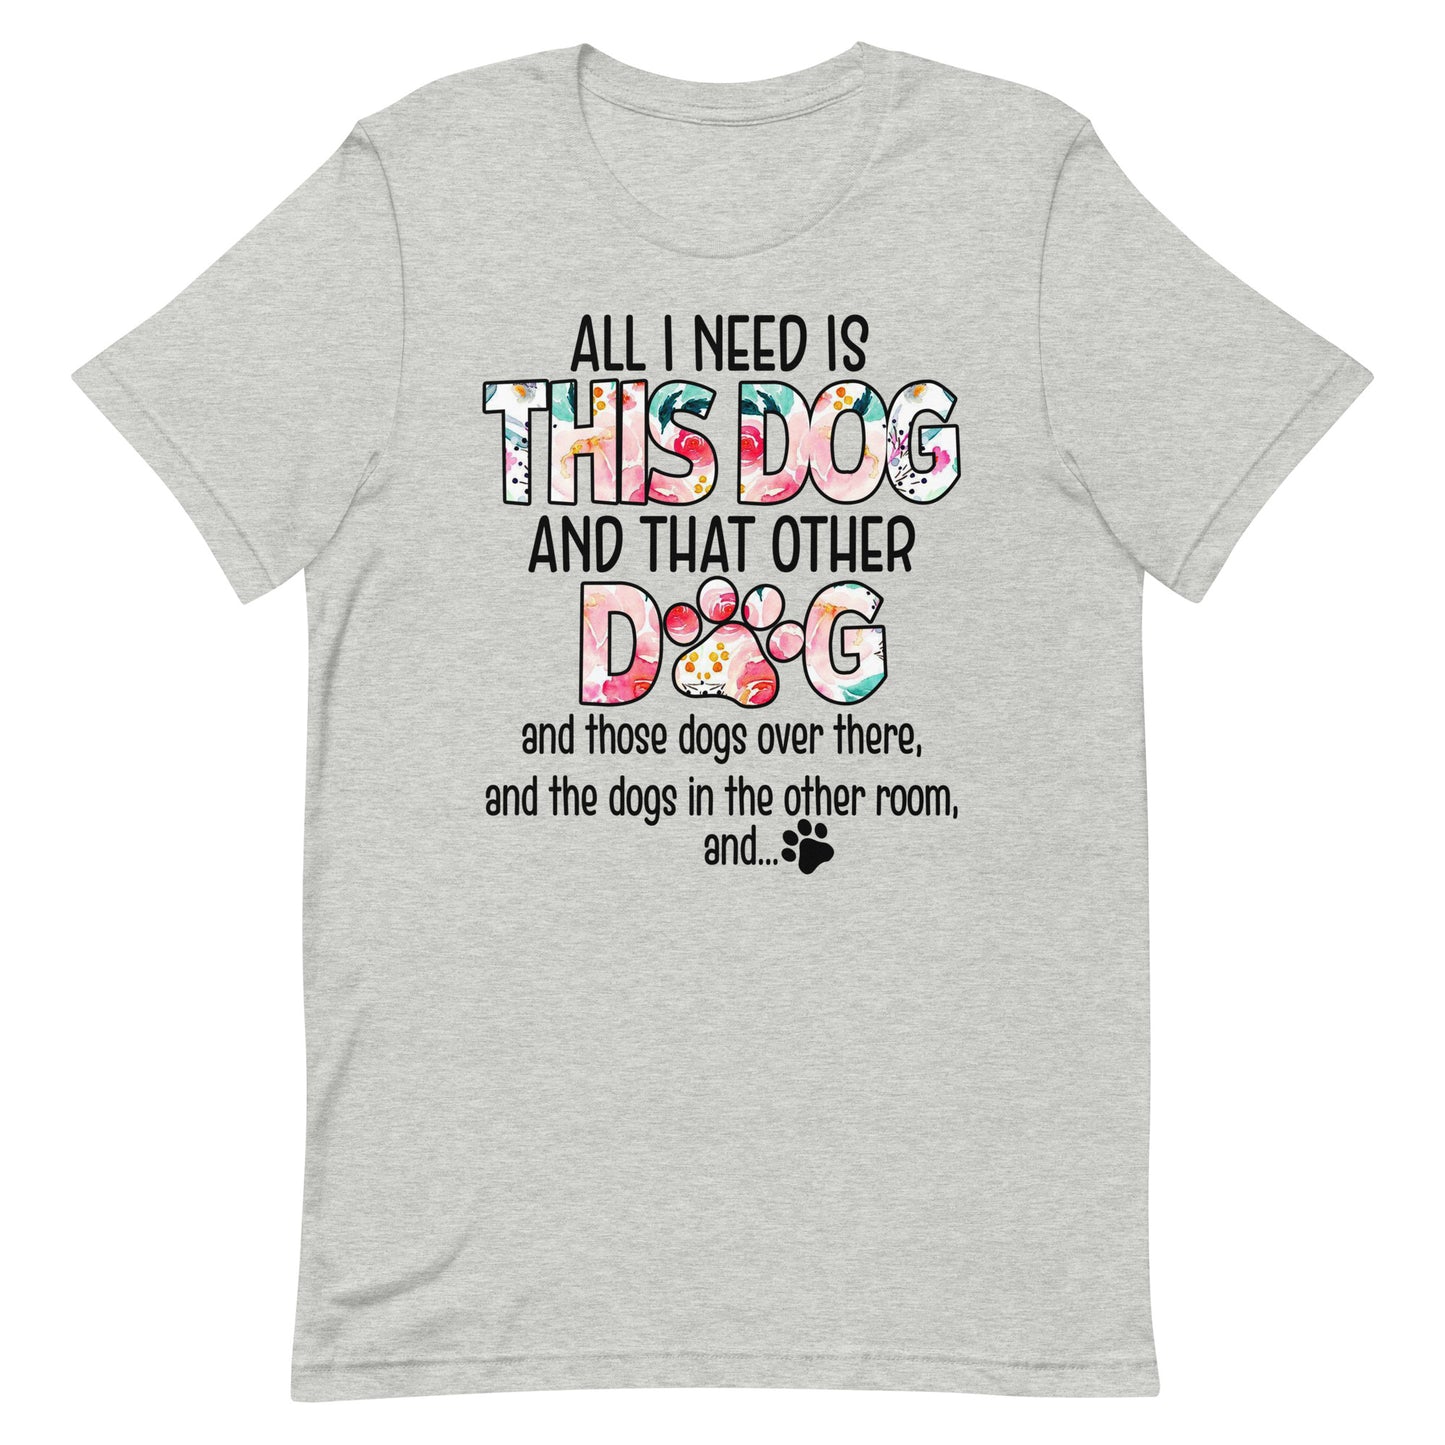 All I Need is This Dog and That Other Dog T-Shirt